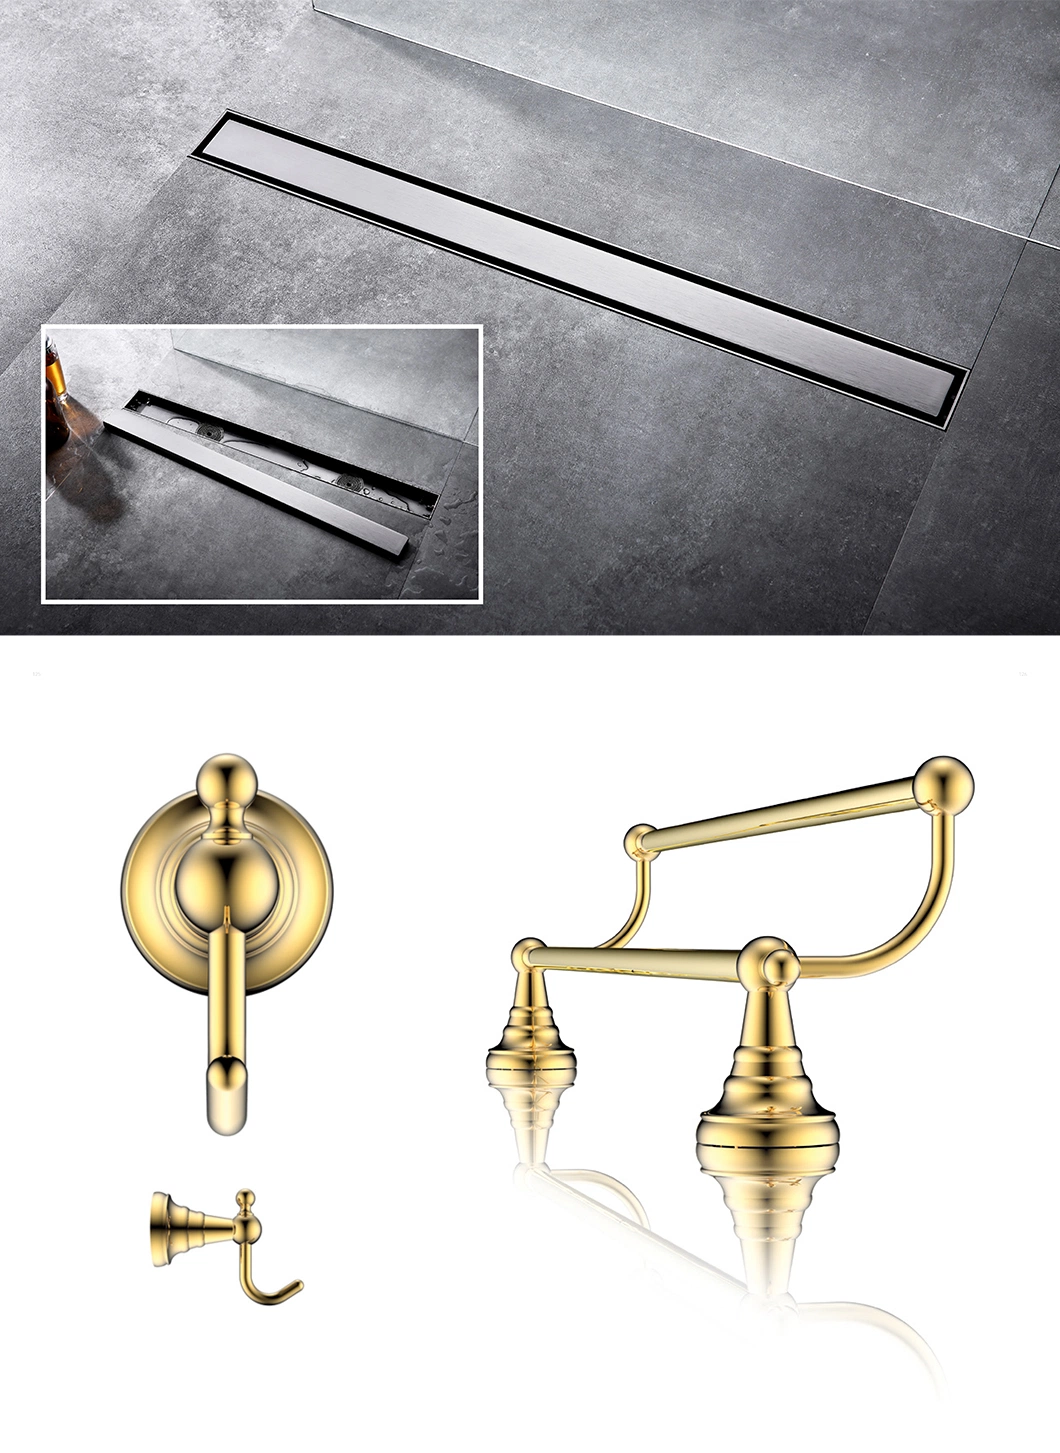 Ablinox Factory Brushed Stainless Steel 304 High Quality Bathtub Arm Handrail Accessories